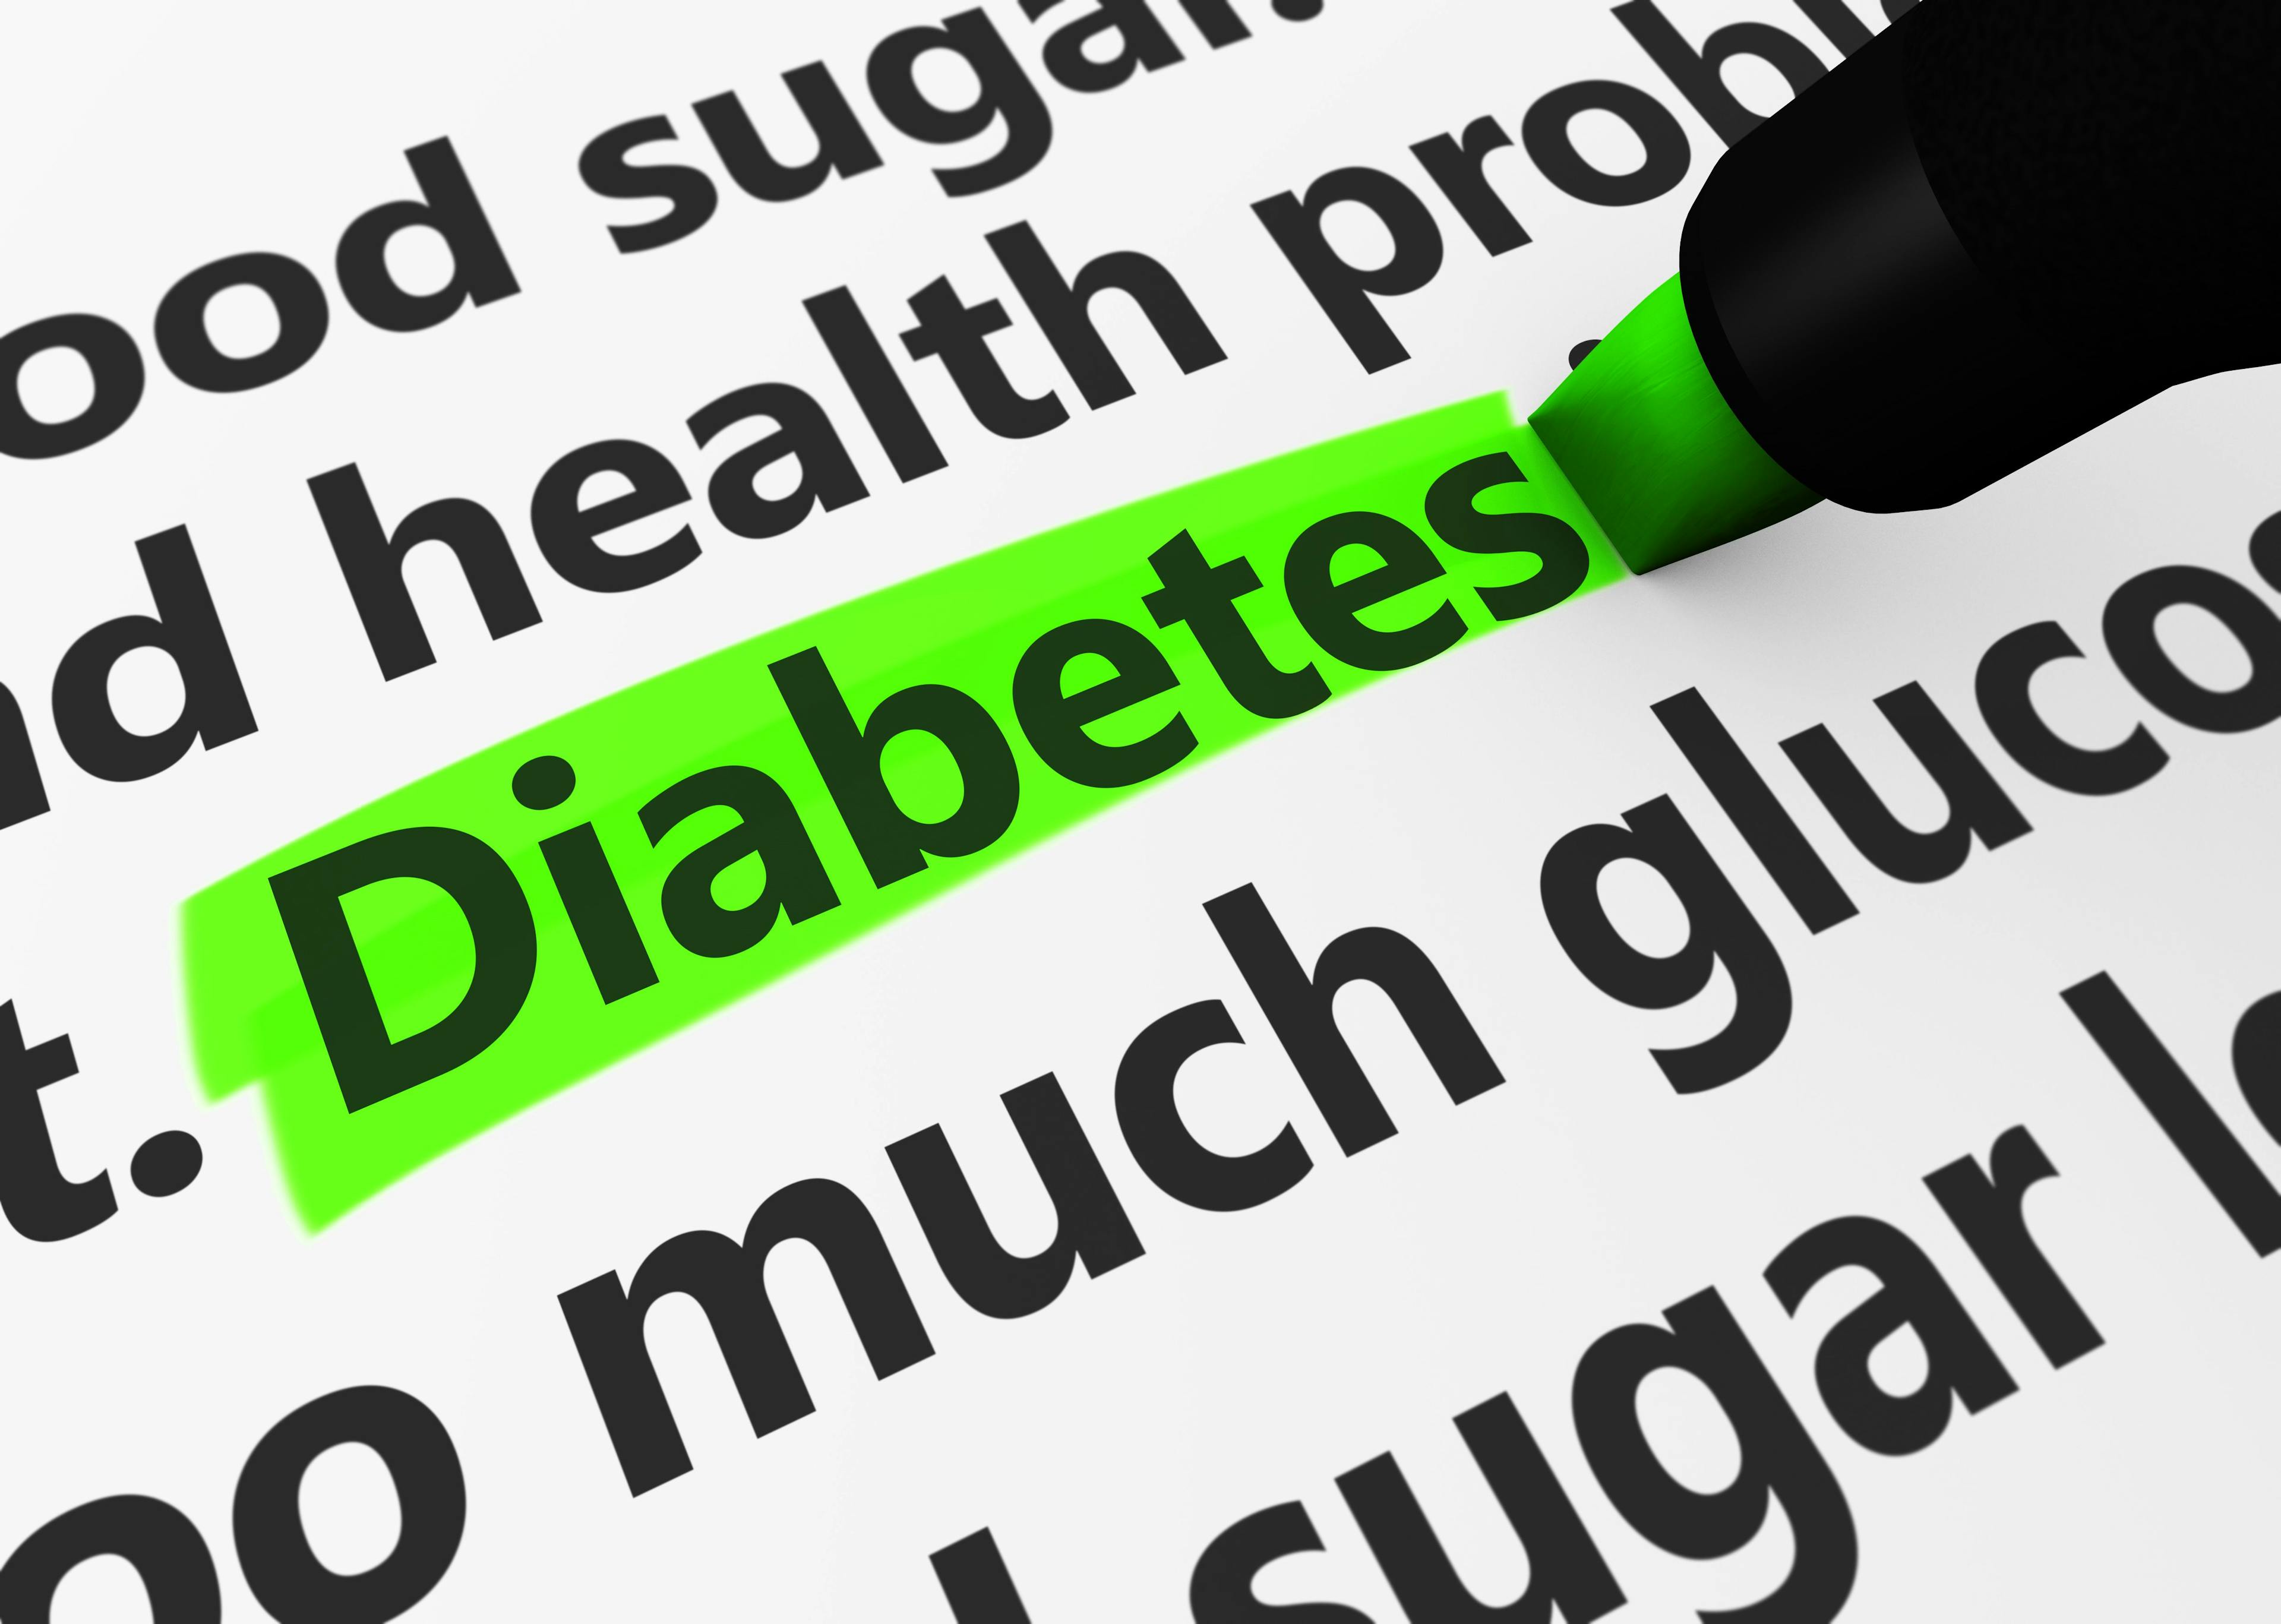 Flash Glucose Monitoring Lowers HbA1c, Rates of DKA in Patients with Type 1 Diabetes